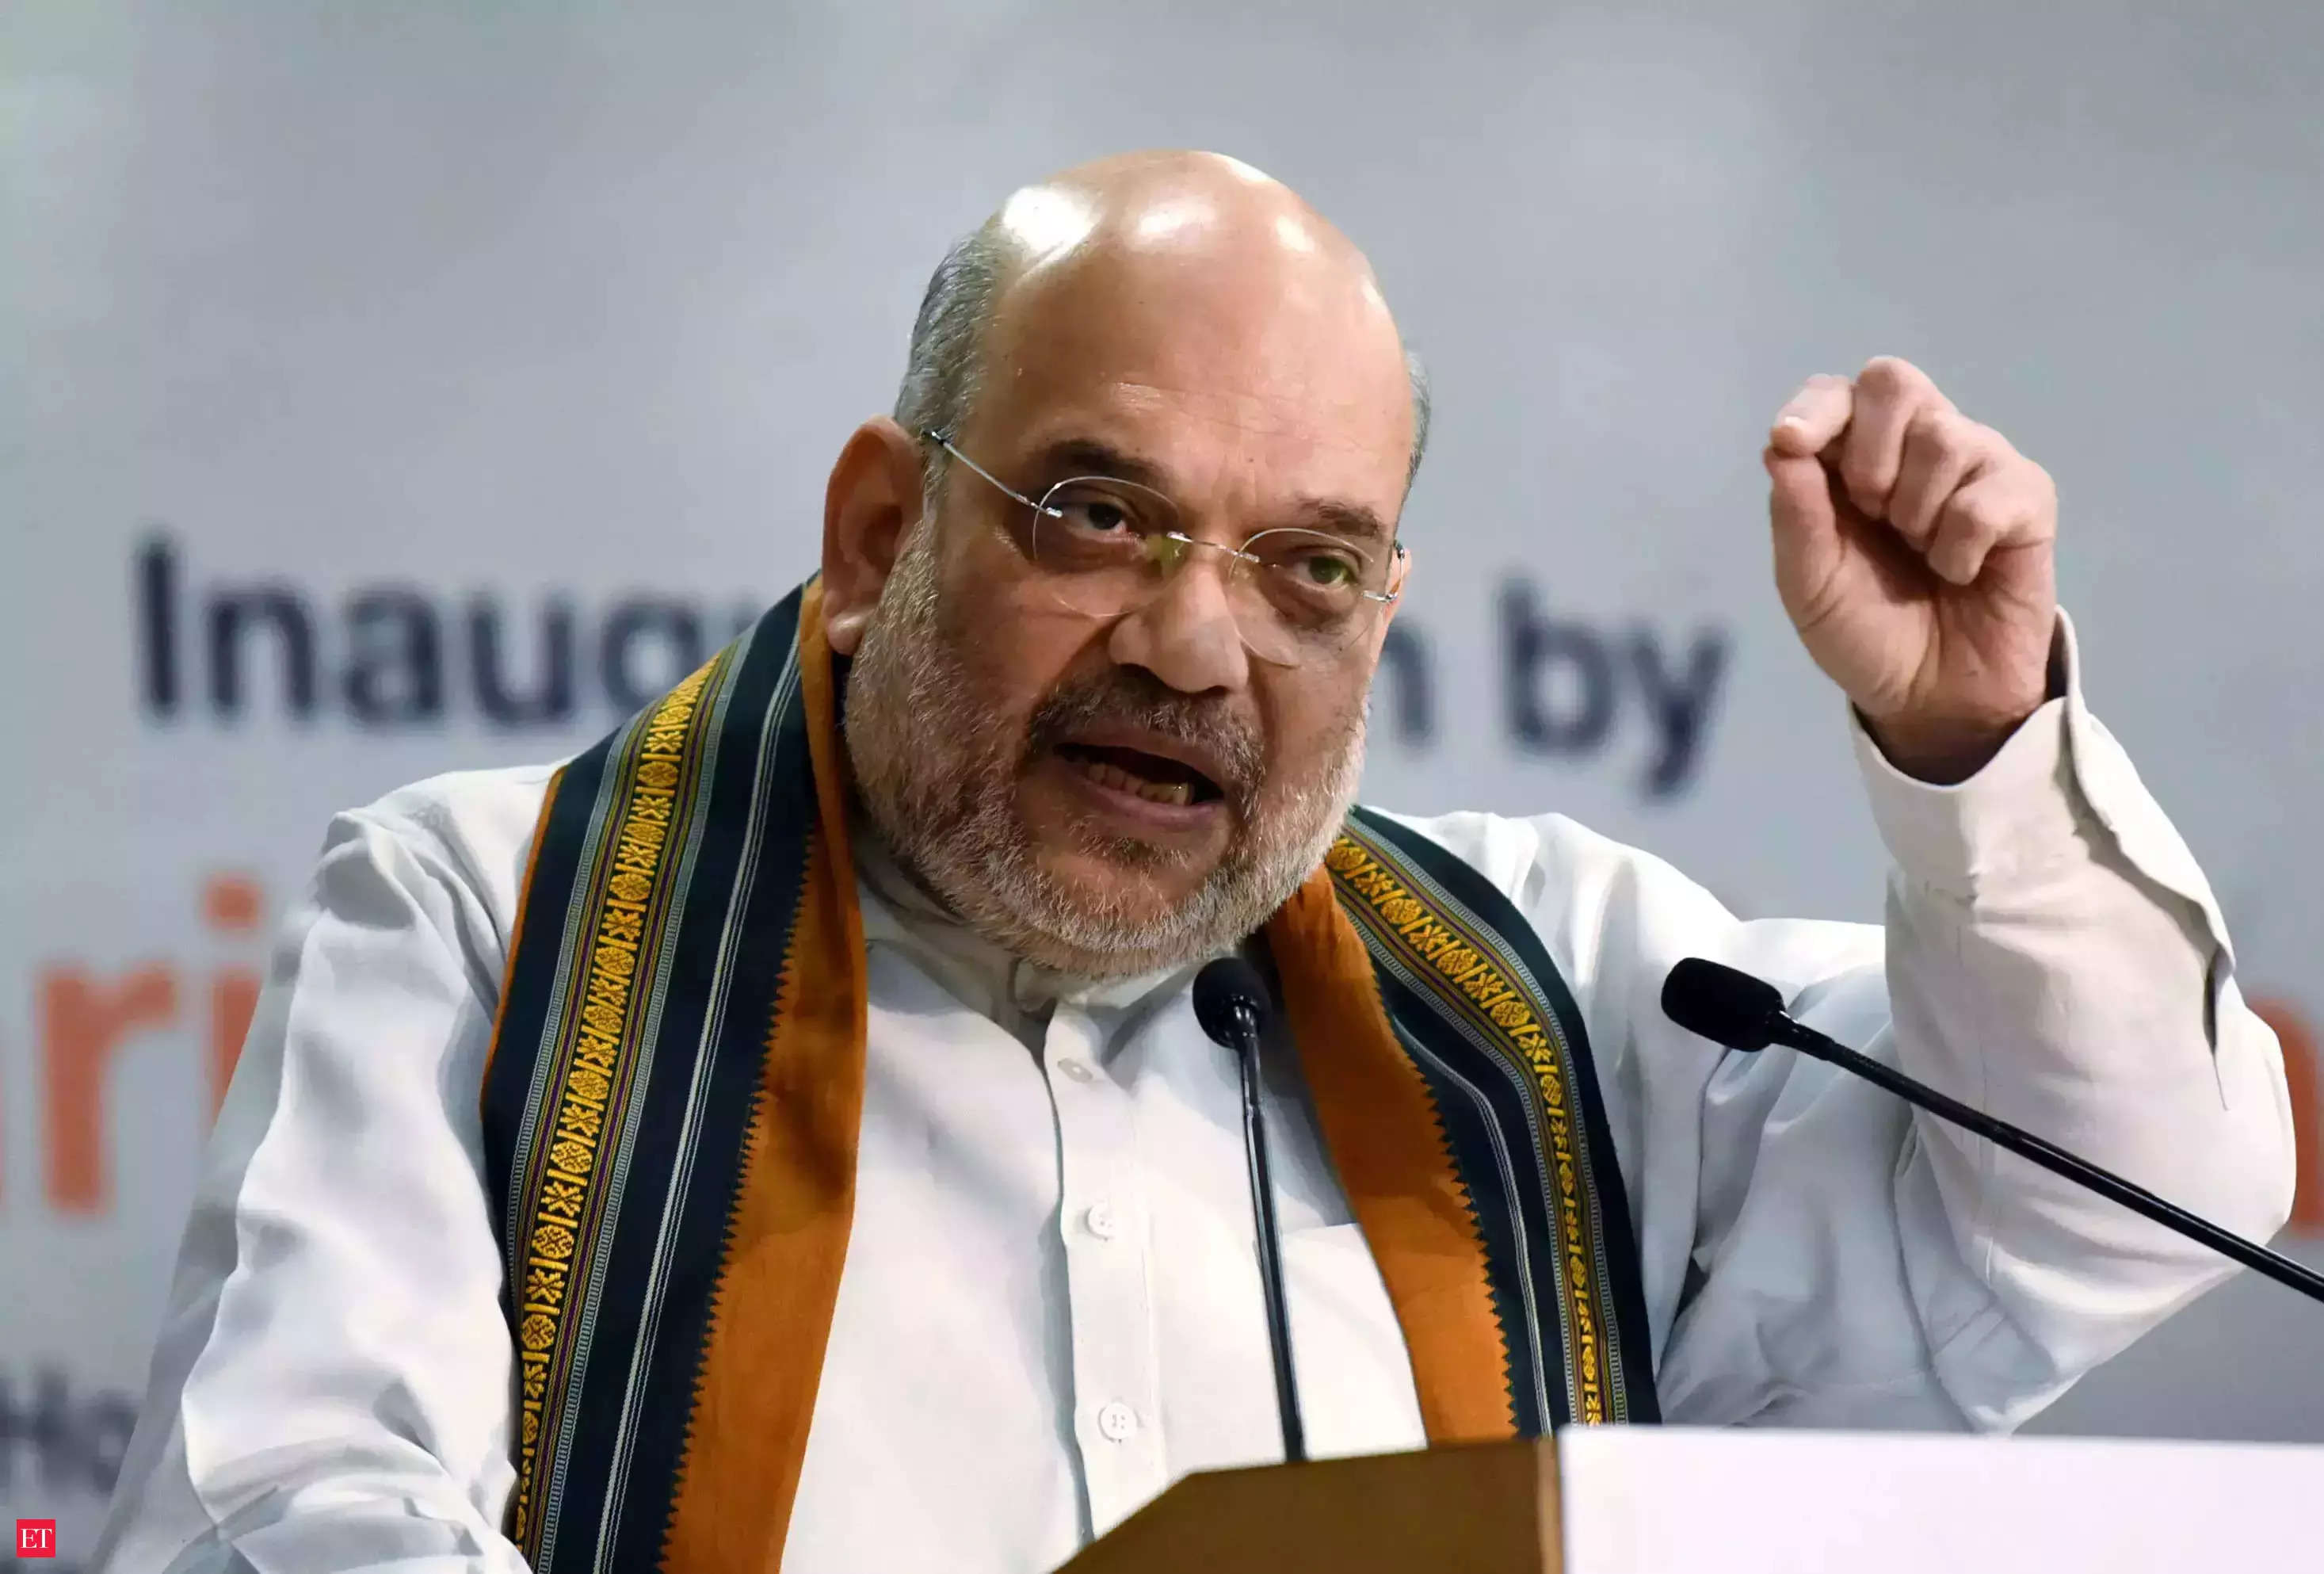 Amit Shah says Congress standards falling since Rahul Gandhi became leader  | India News - Times of India